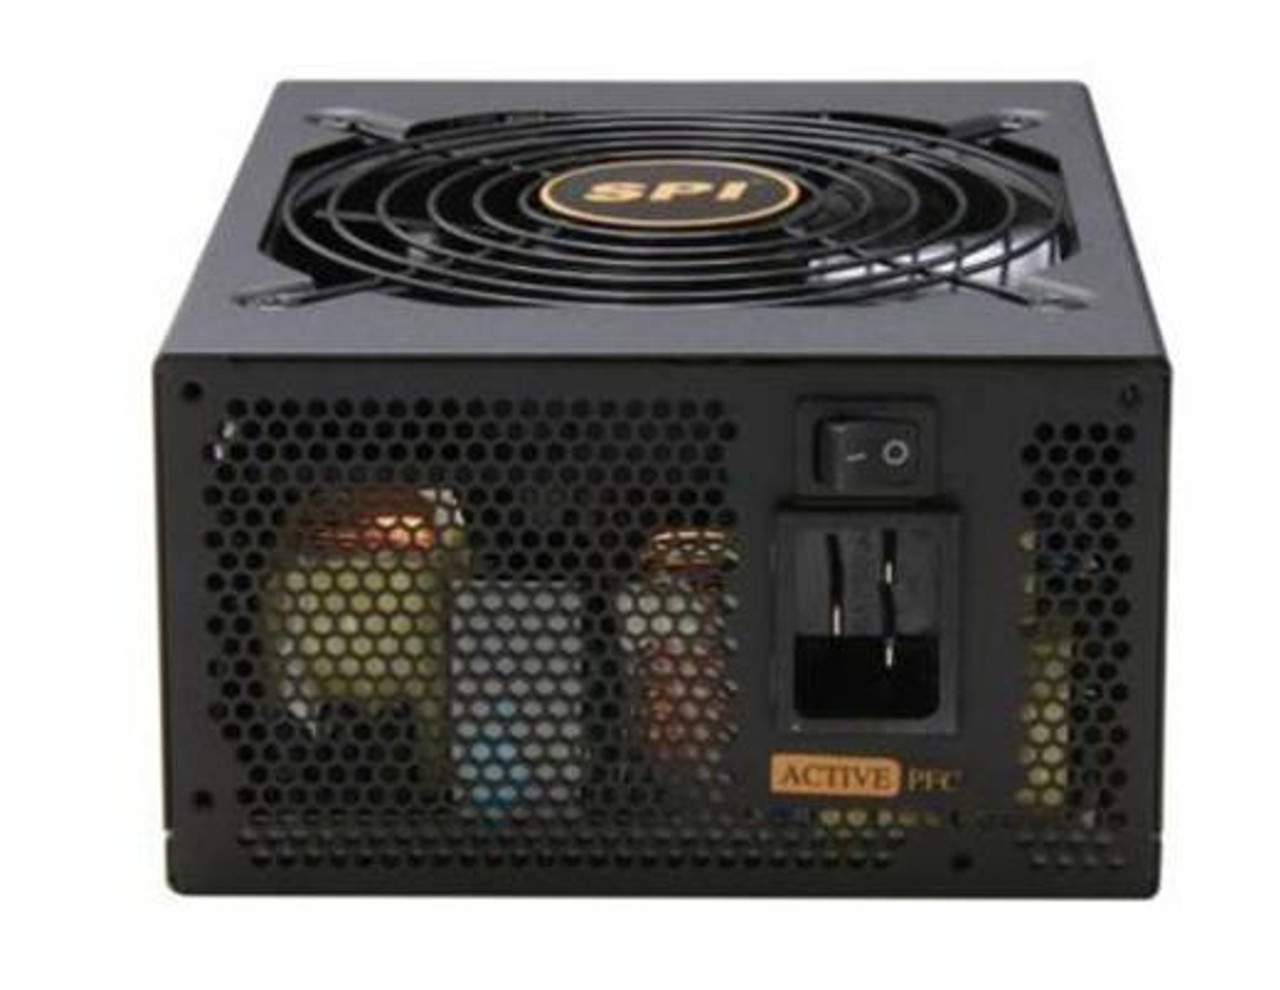 R-FSP1000-50TGM Sparkle Power 1000-Watts ATX12V 2.3 Switching 80Plus Gold Power Supply with Active PFC